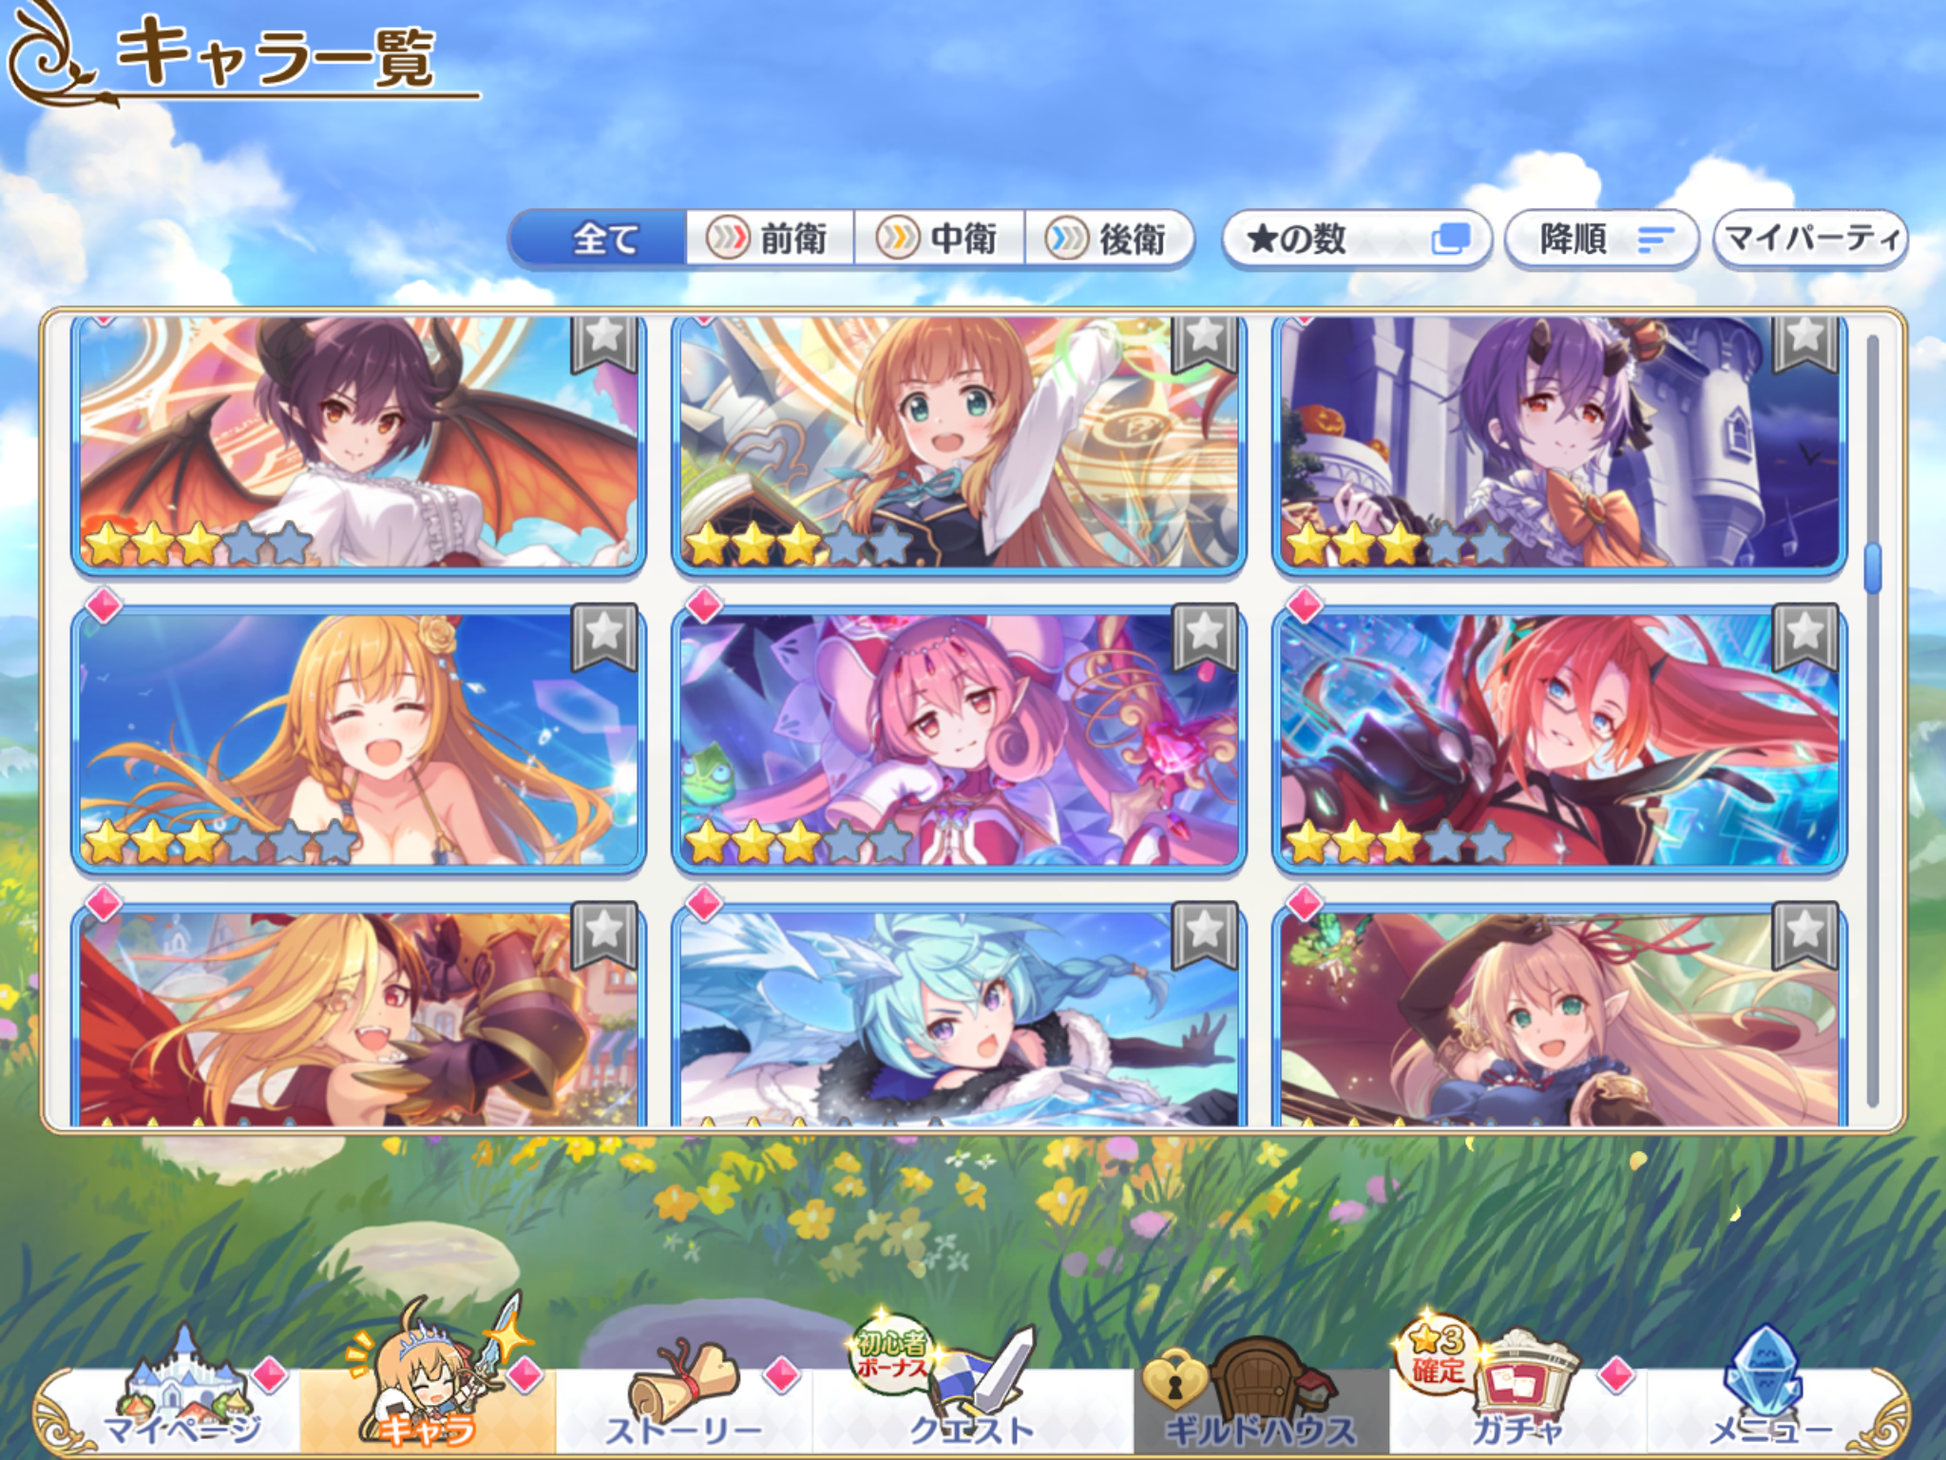 [JP][INSTANT] Priconne 71x3* + 37k Jewels Ames 3Neneka Starter Account Princess Connect Re:Dive-Mobile Games Starter